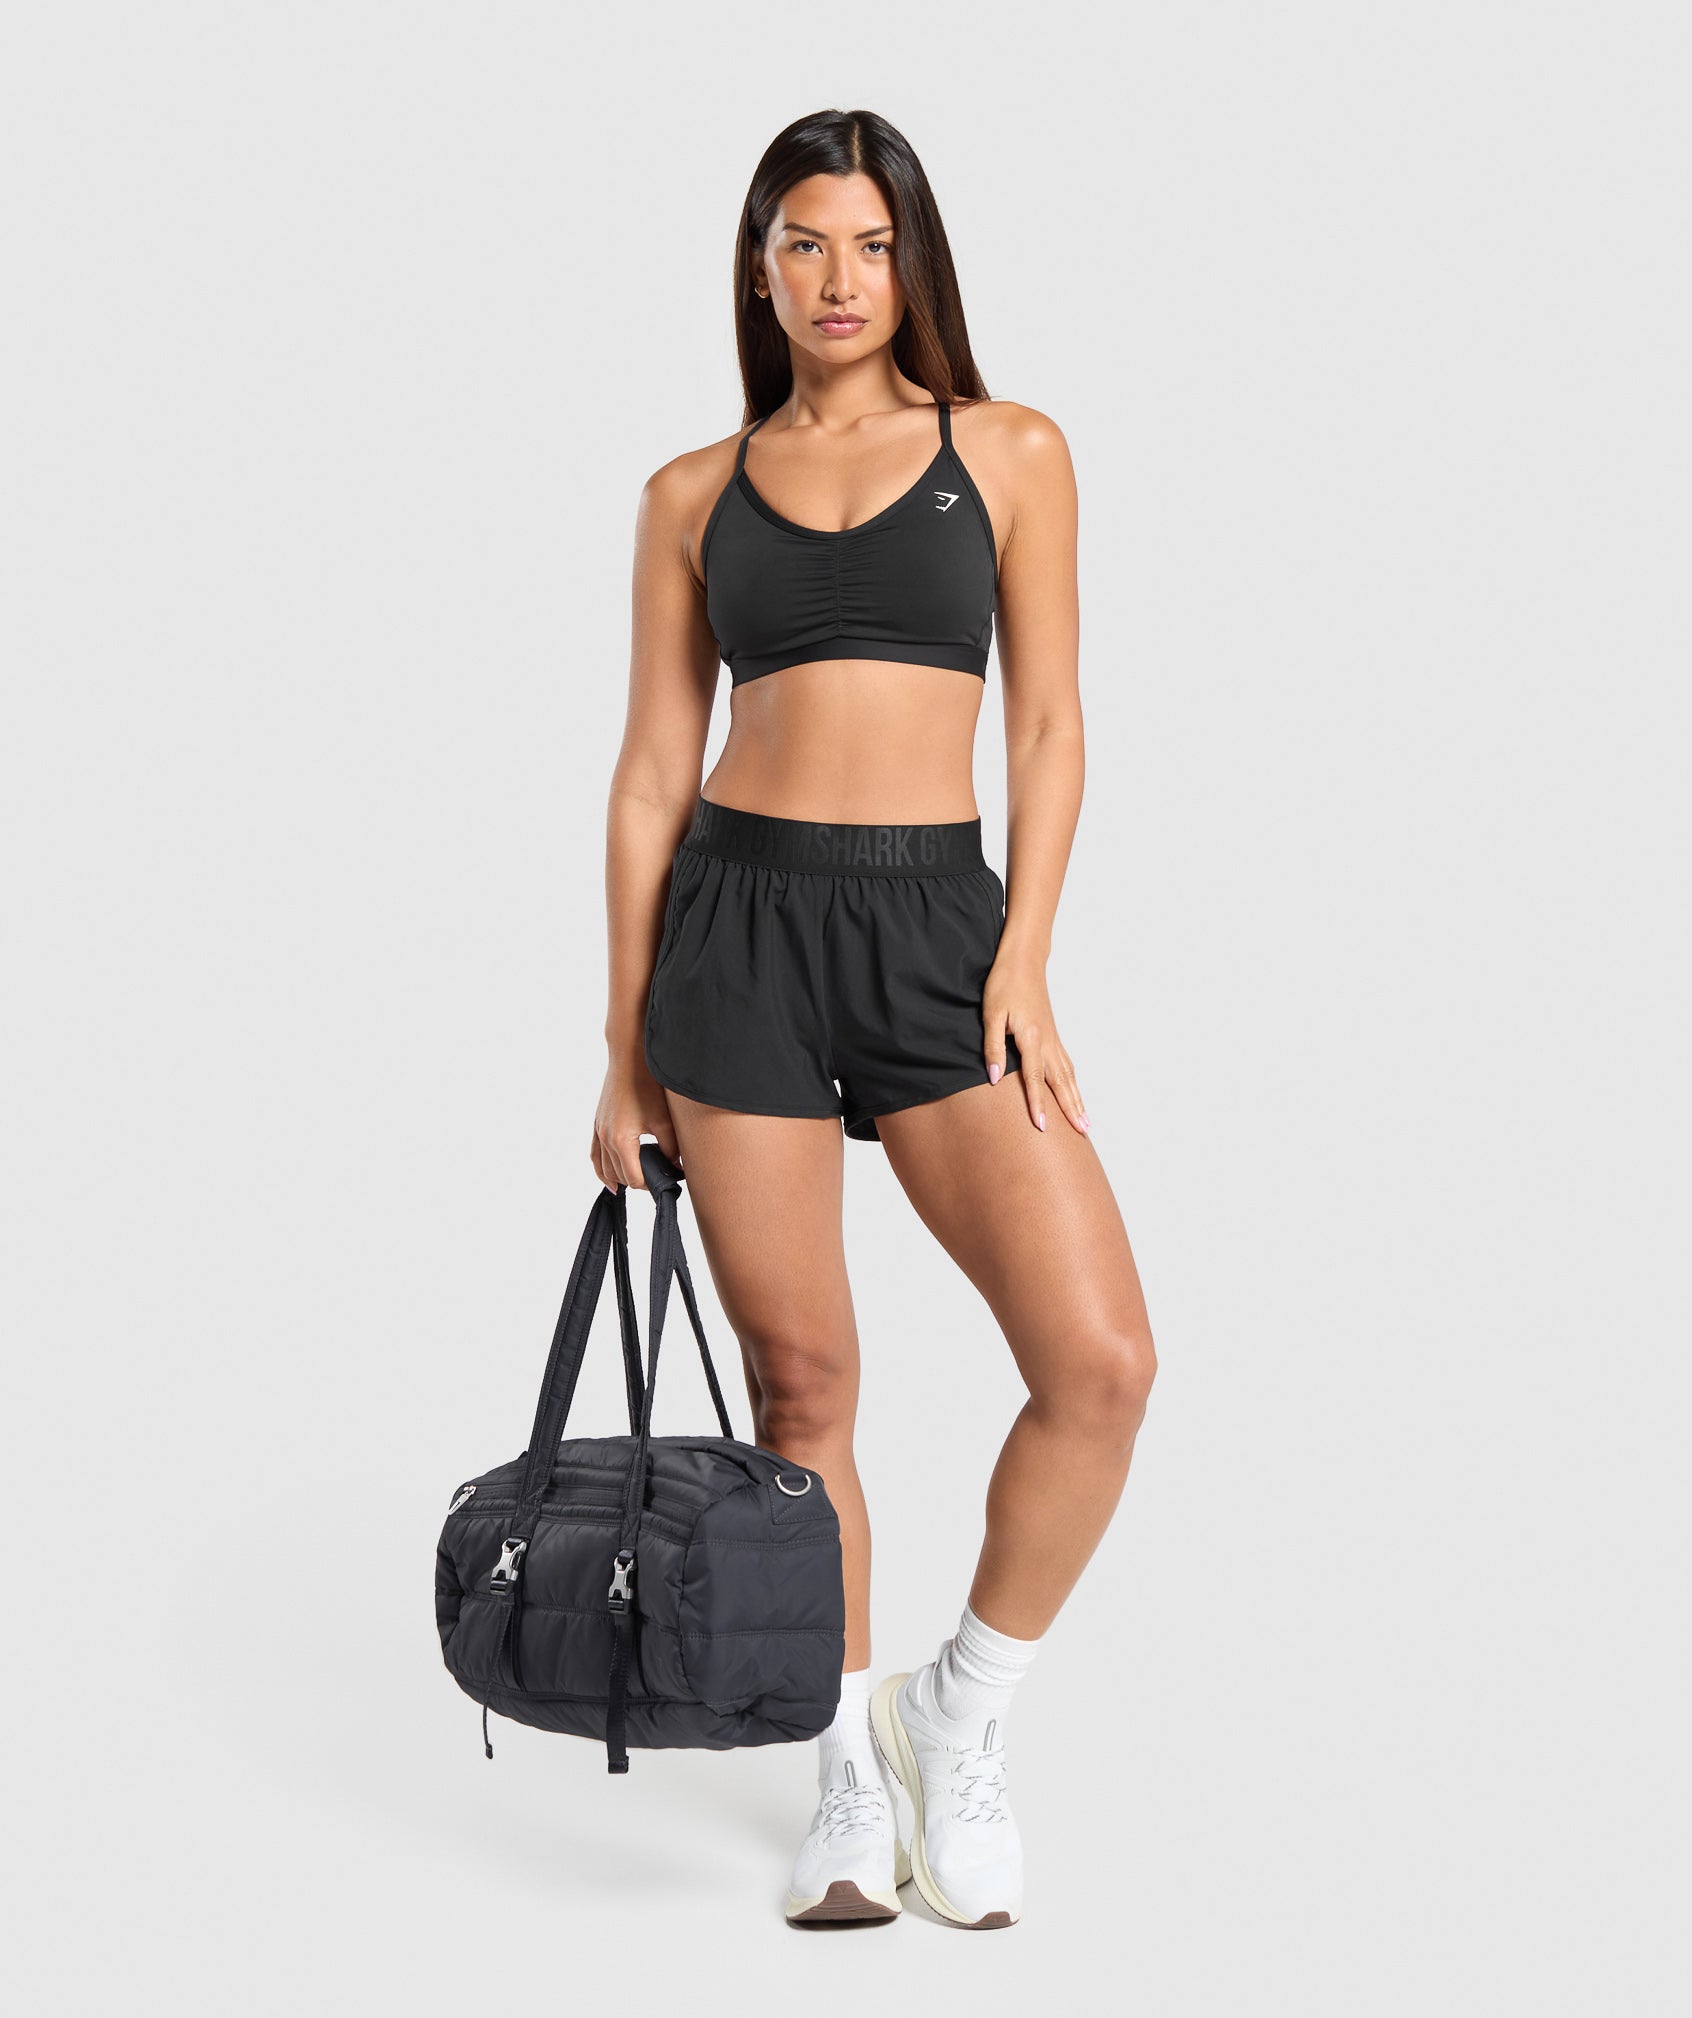 Ruched Sports Bra in Black - view 5